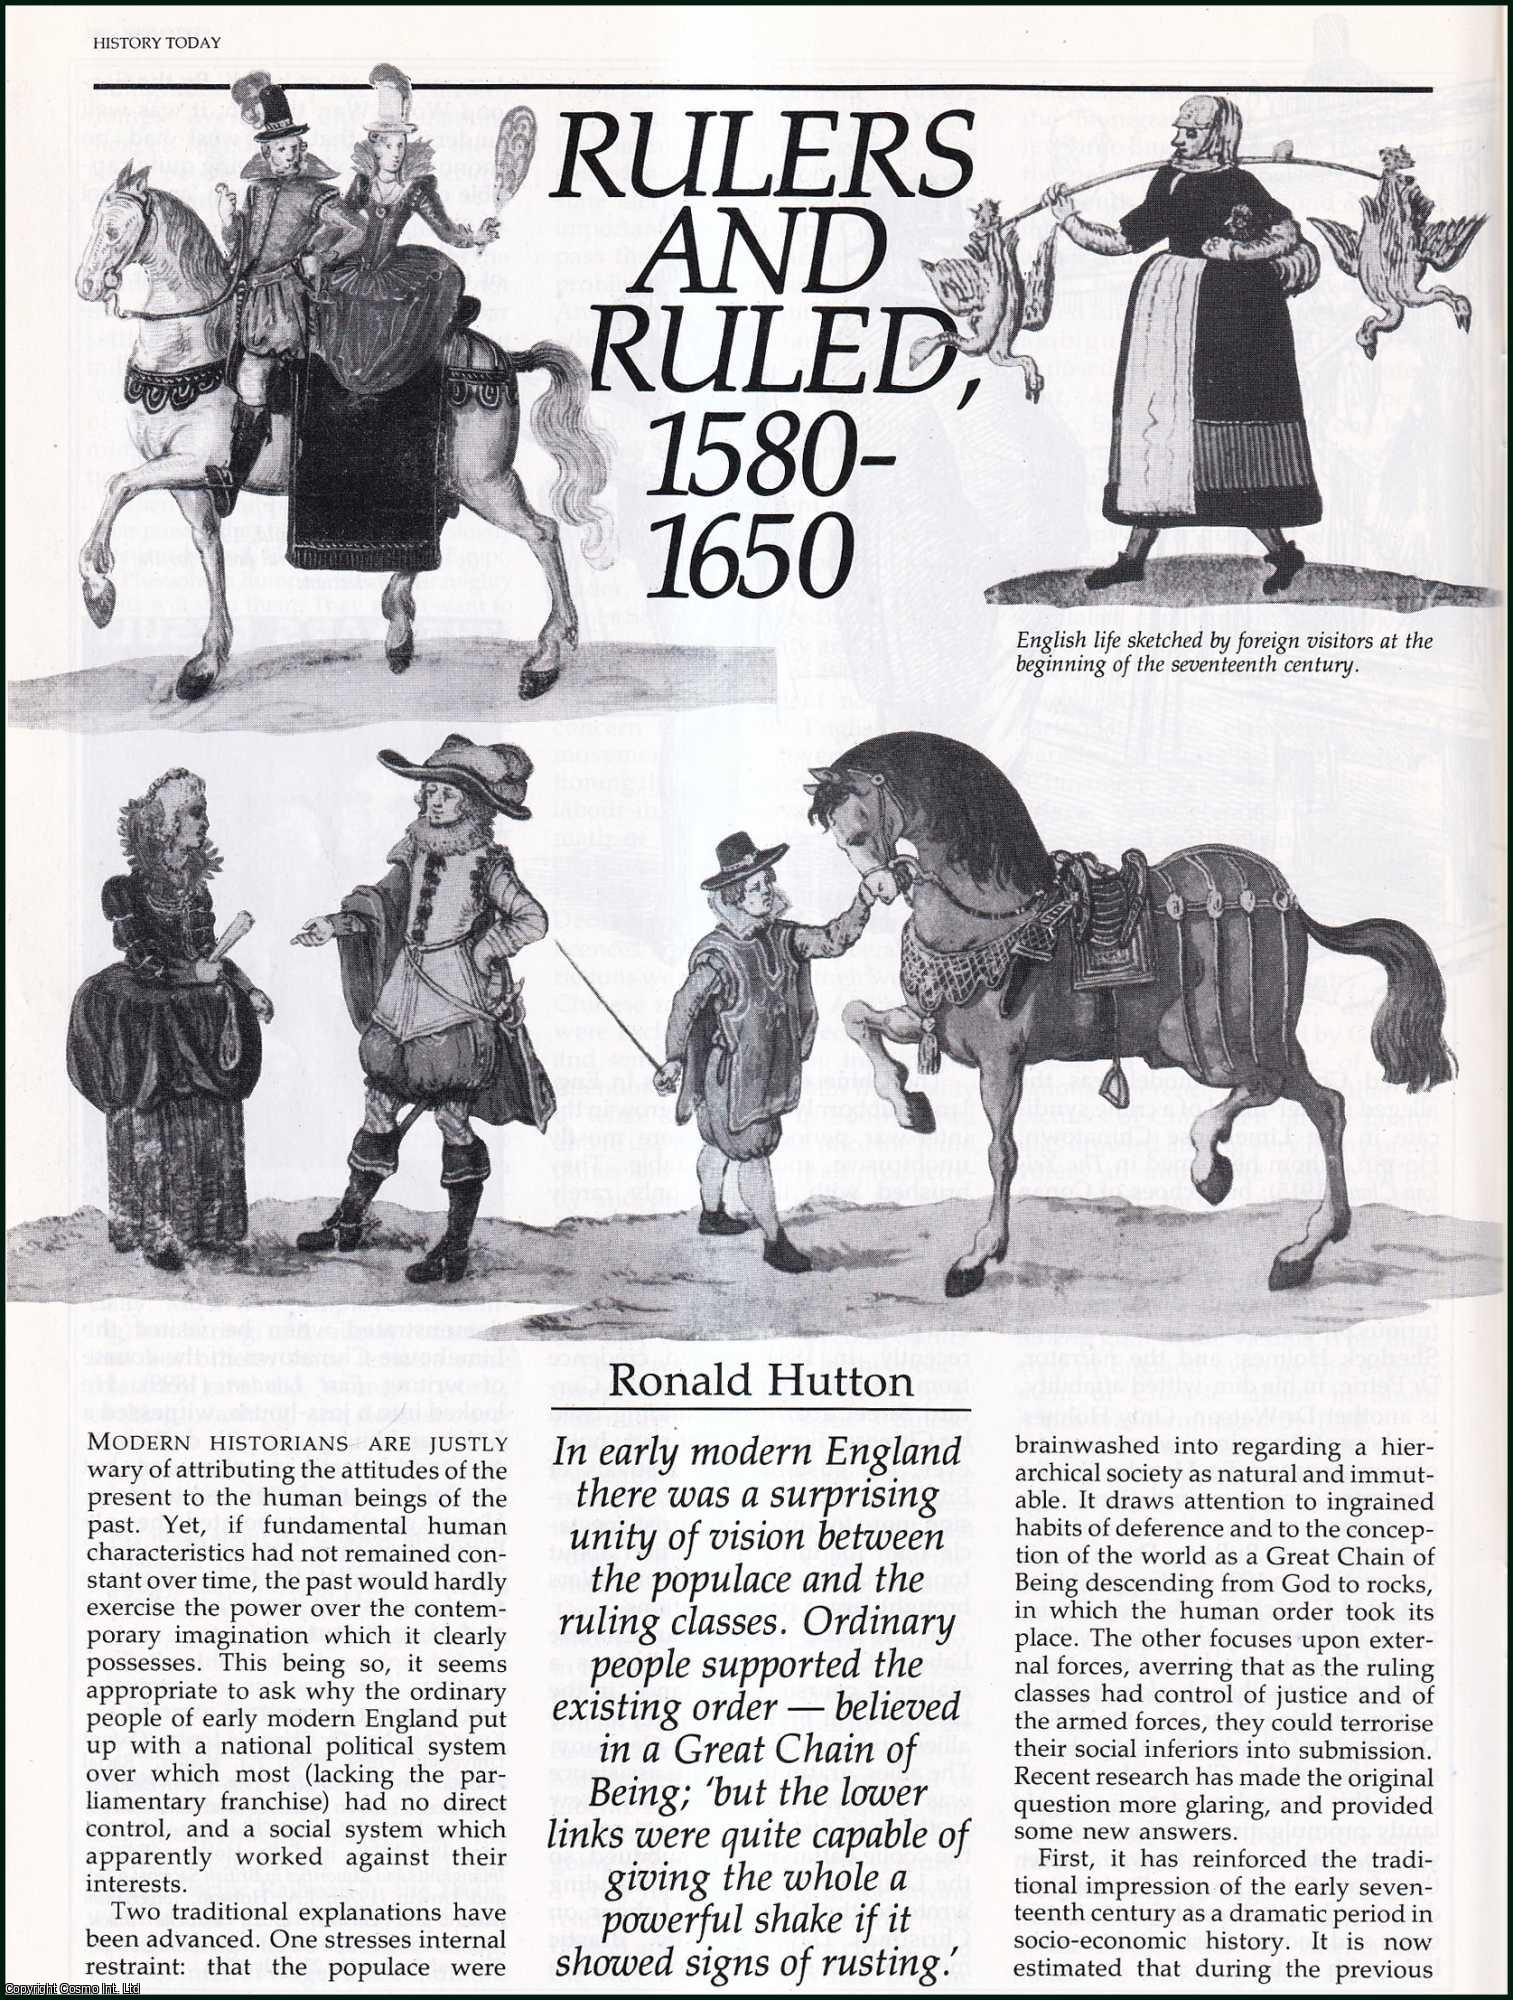 Ronald Hutton - Rulers and Ruled, 1560-1650. An original article from History Today, 1985.